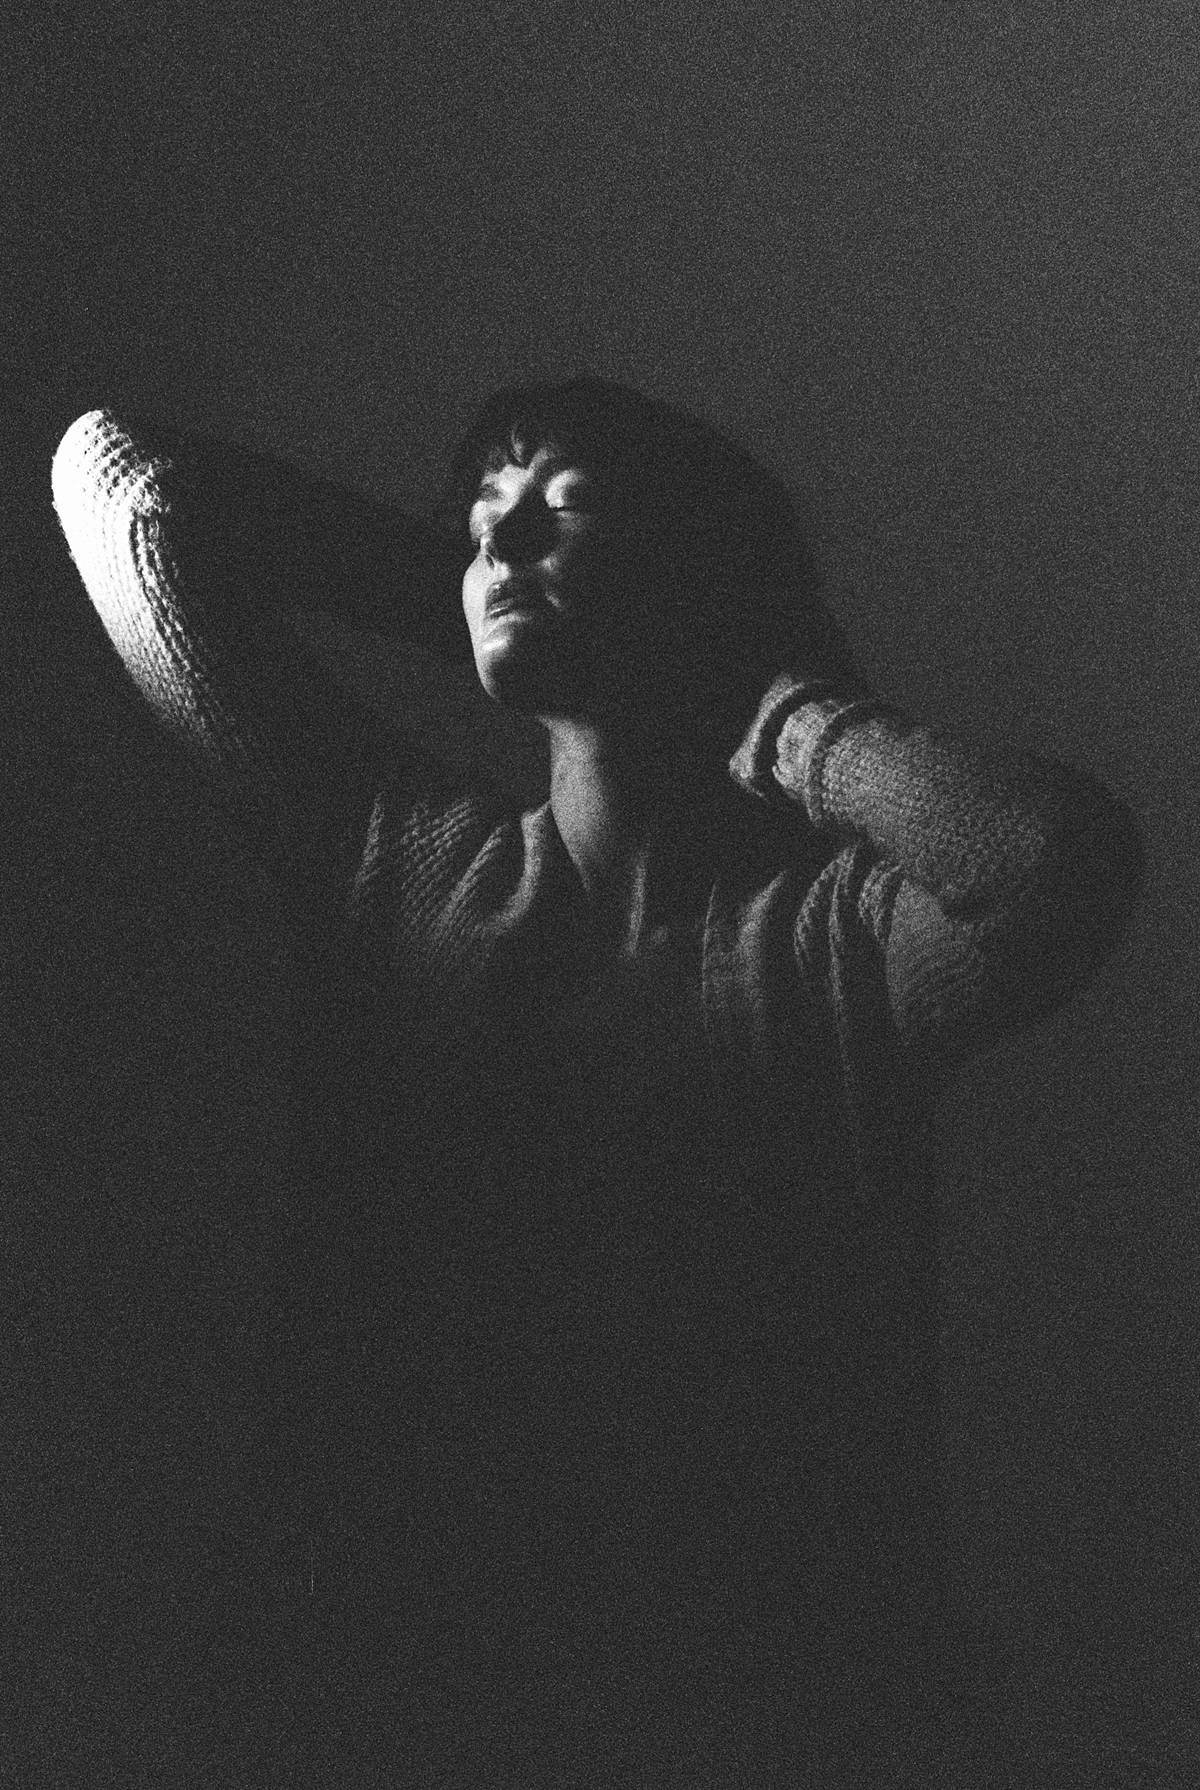 grainy black and white female studio portrait pose with spotlight on face using expired and pushed 35mm black and white film